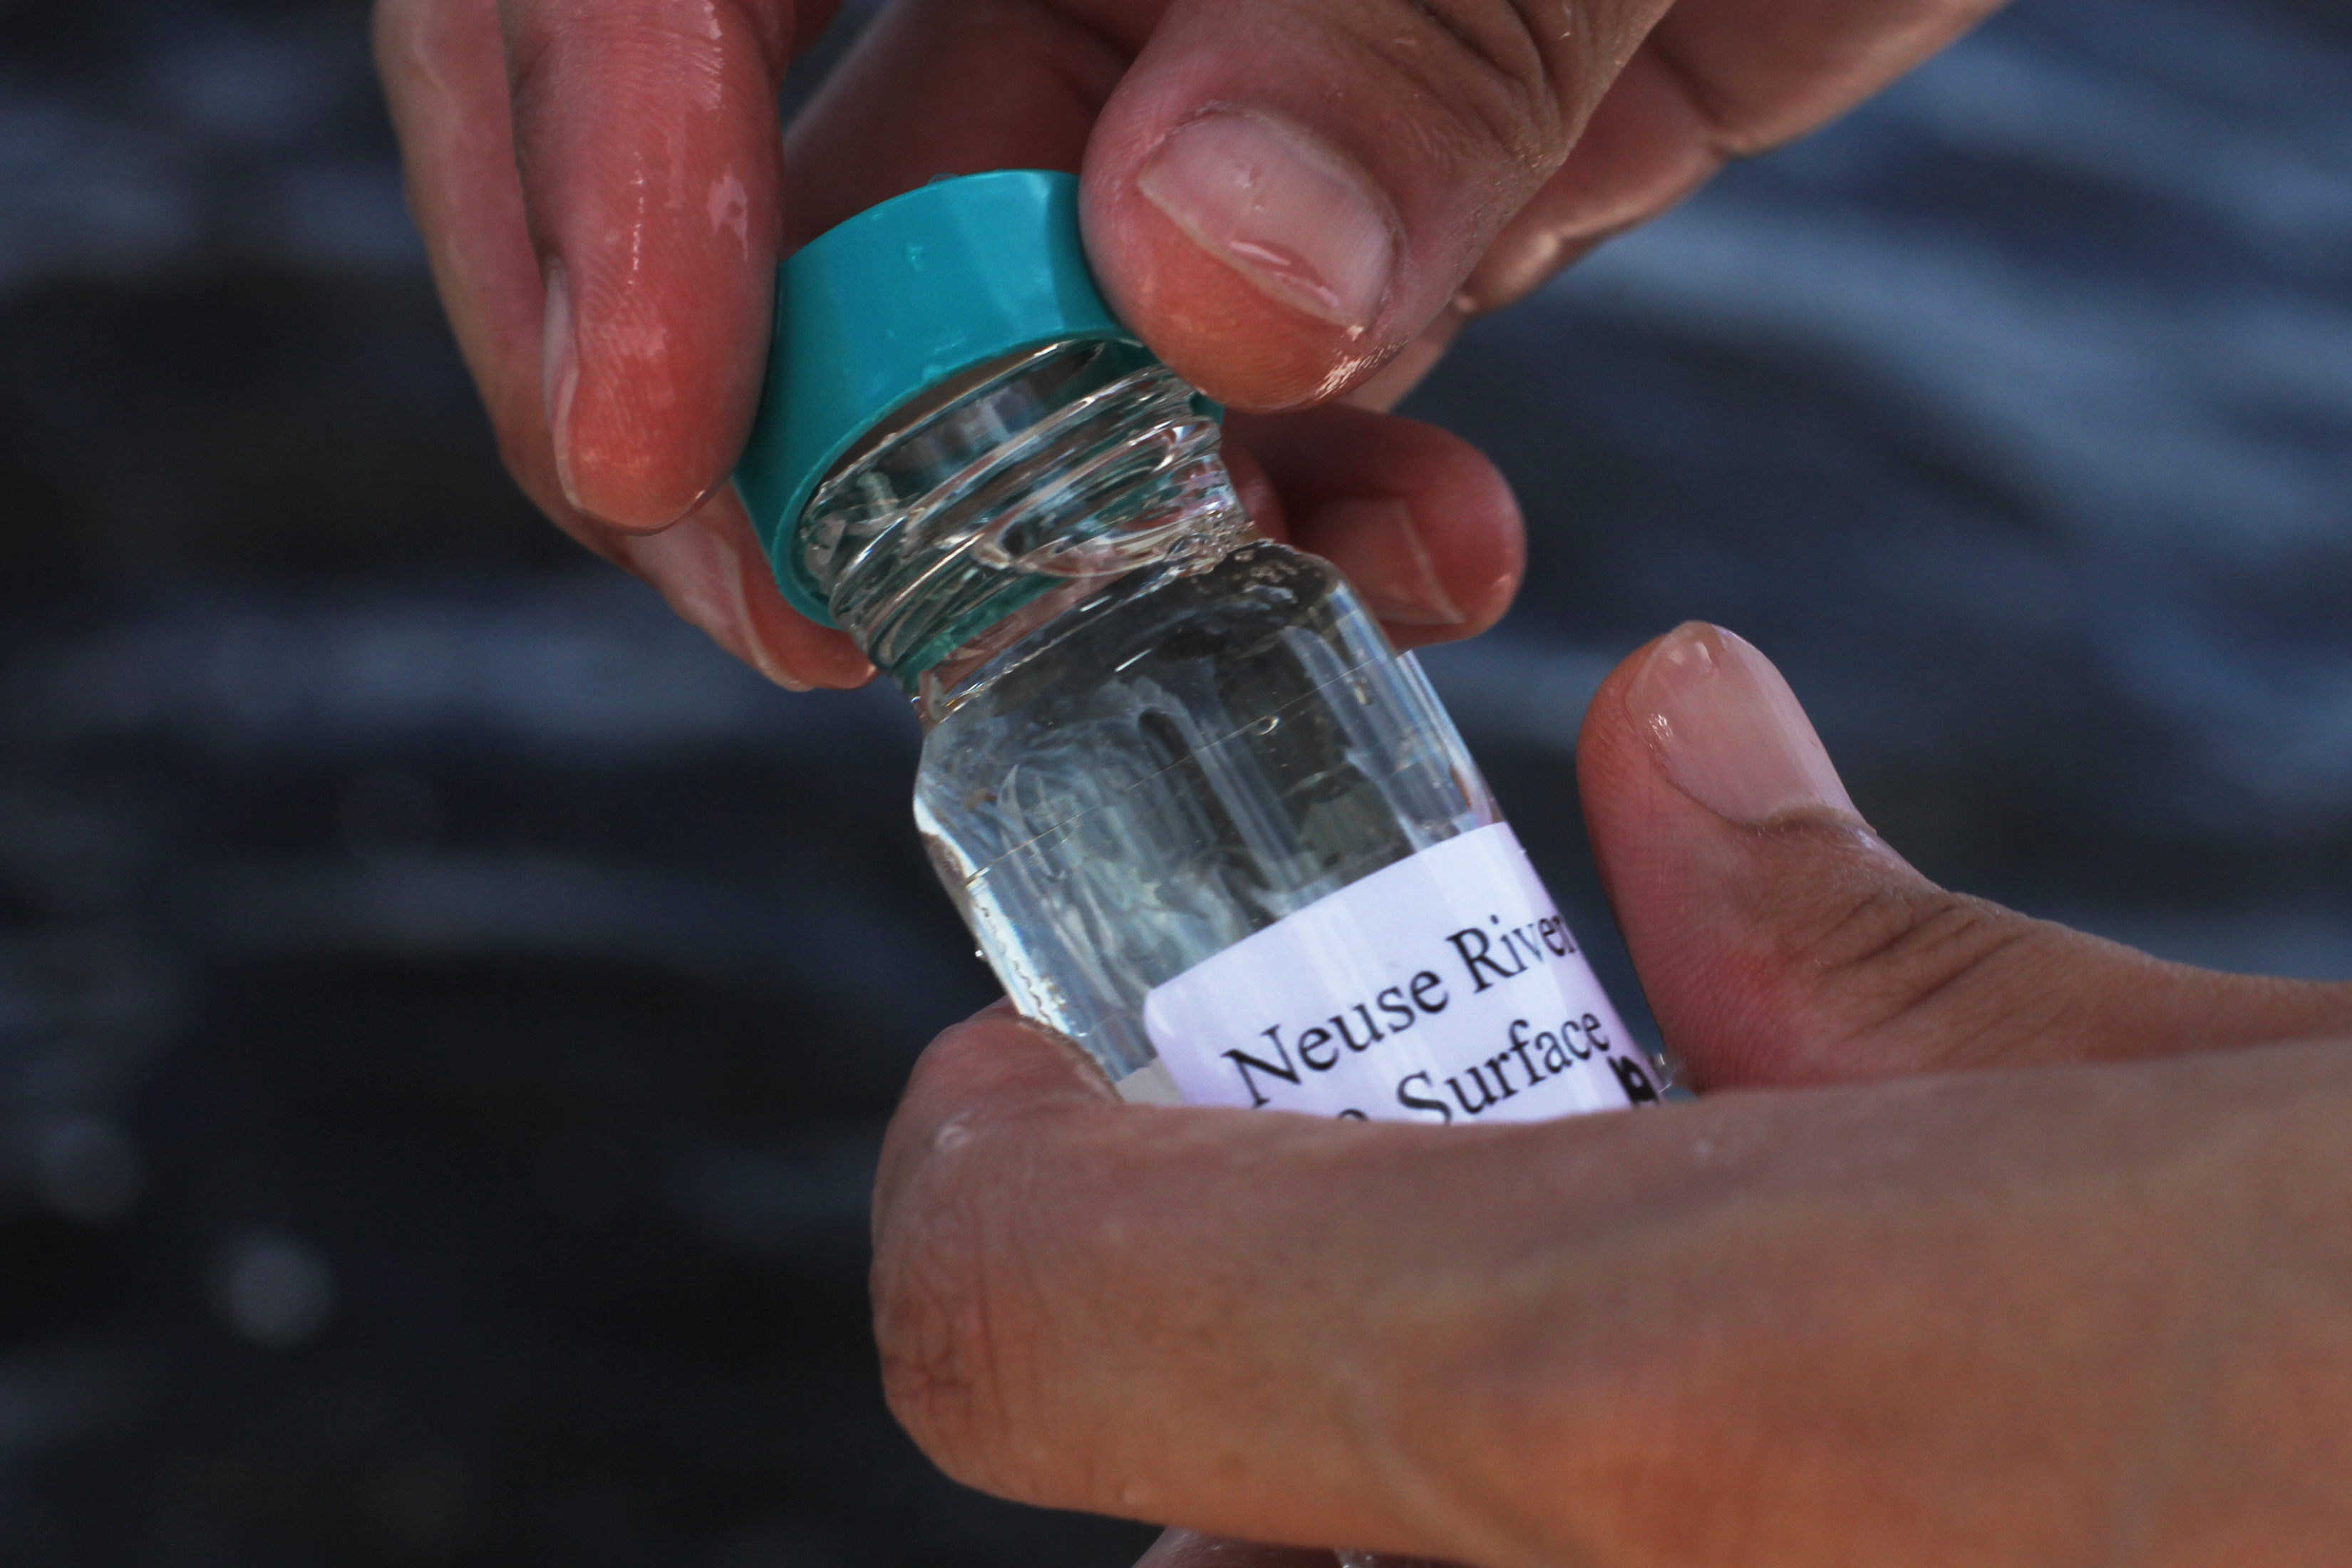 Weida Gong collects a water sample for sequencing from the Neuse River